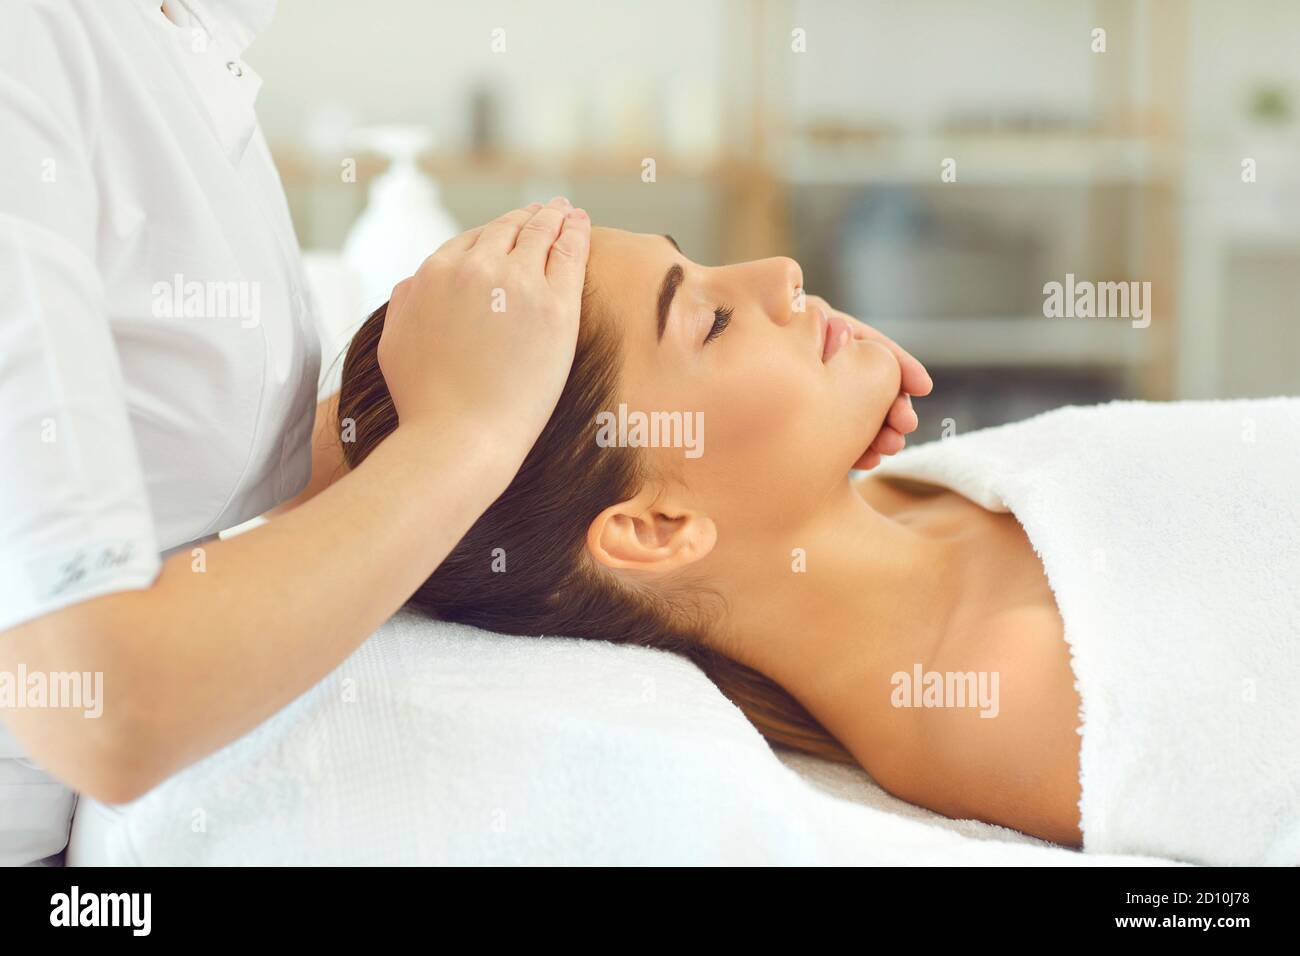 Cosmetologist making manual rejuvenating facial massage for young woman in beauty salon Stock Photo